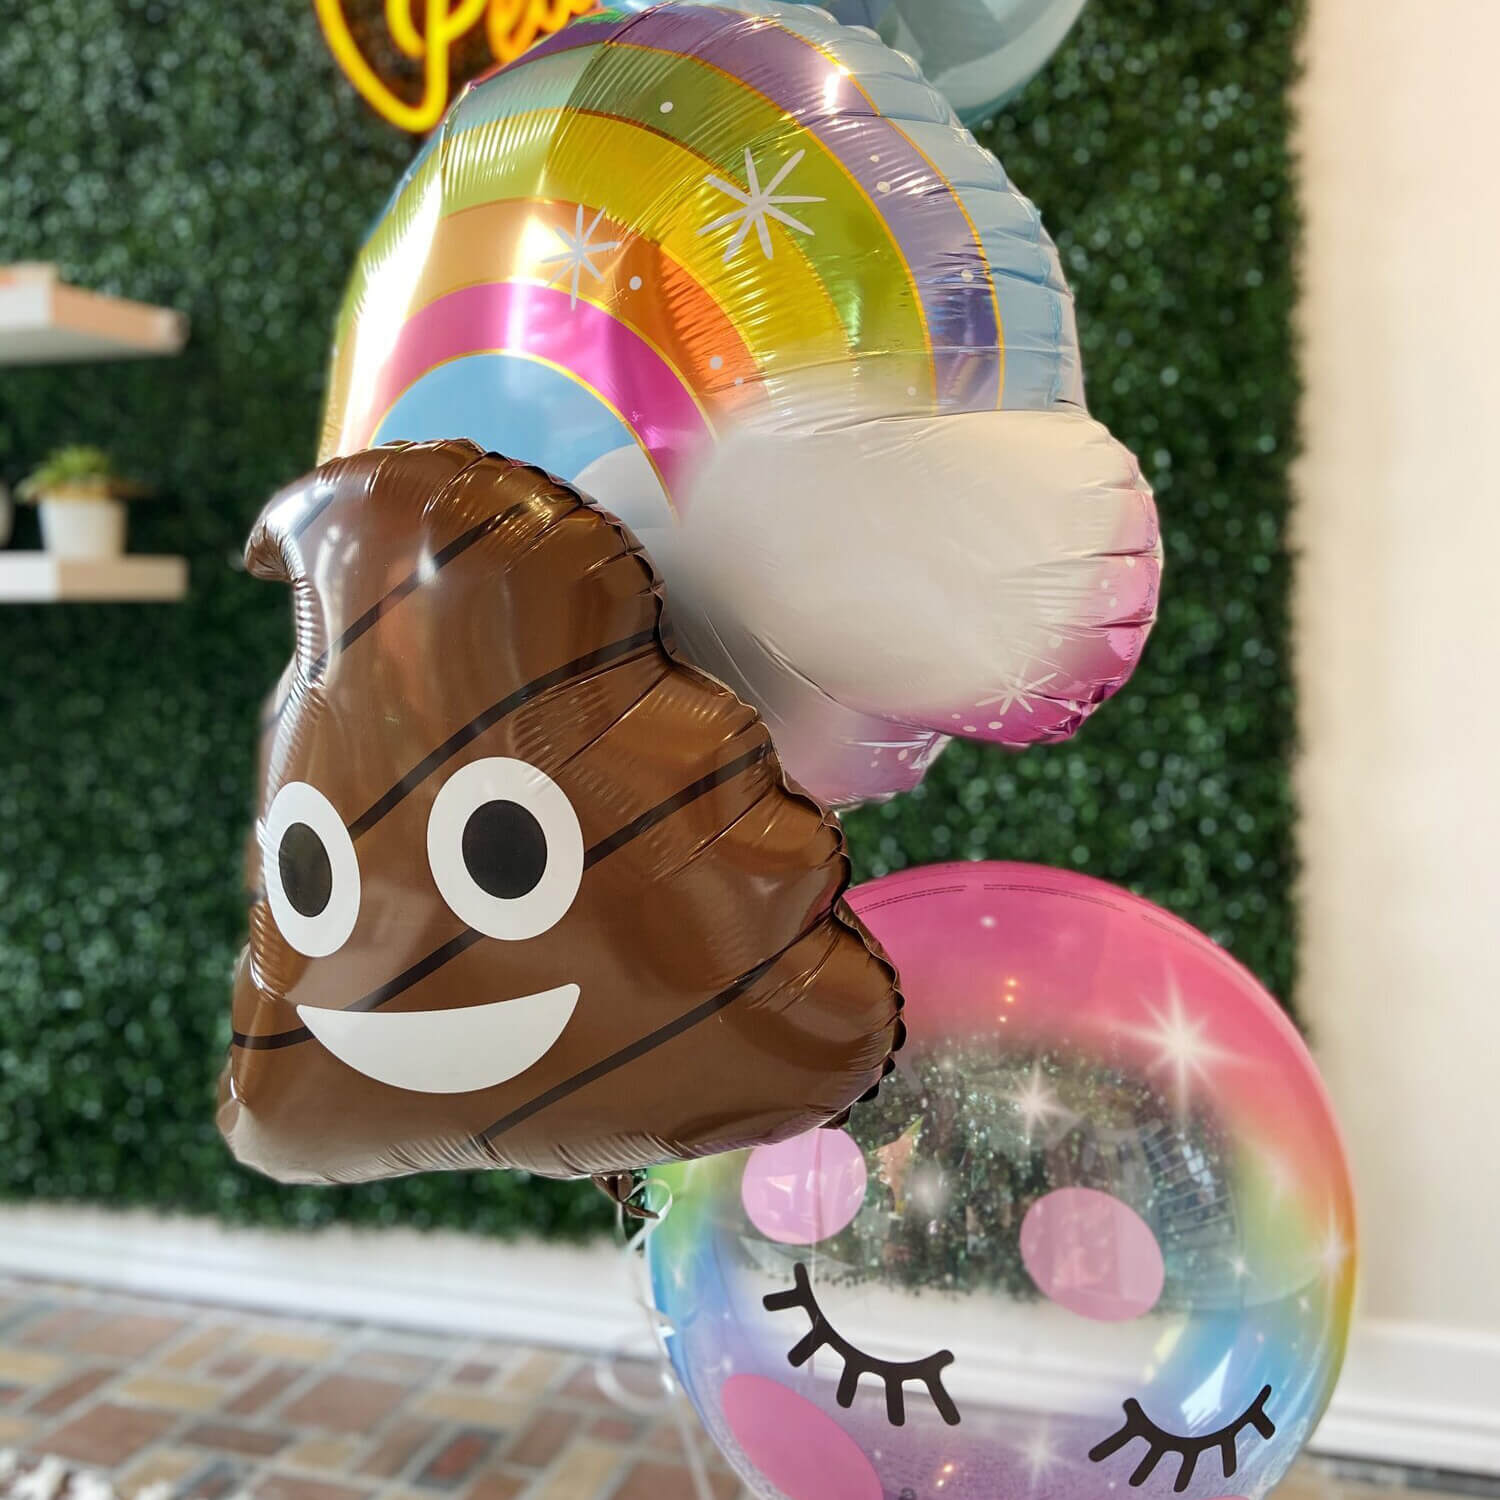 Oversized helium bouquet with poop emoji, pastel rainbow, light blue orb and smiling eyelash bubble balloons from Just Peachy in Little Rock, Arkansas